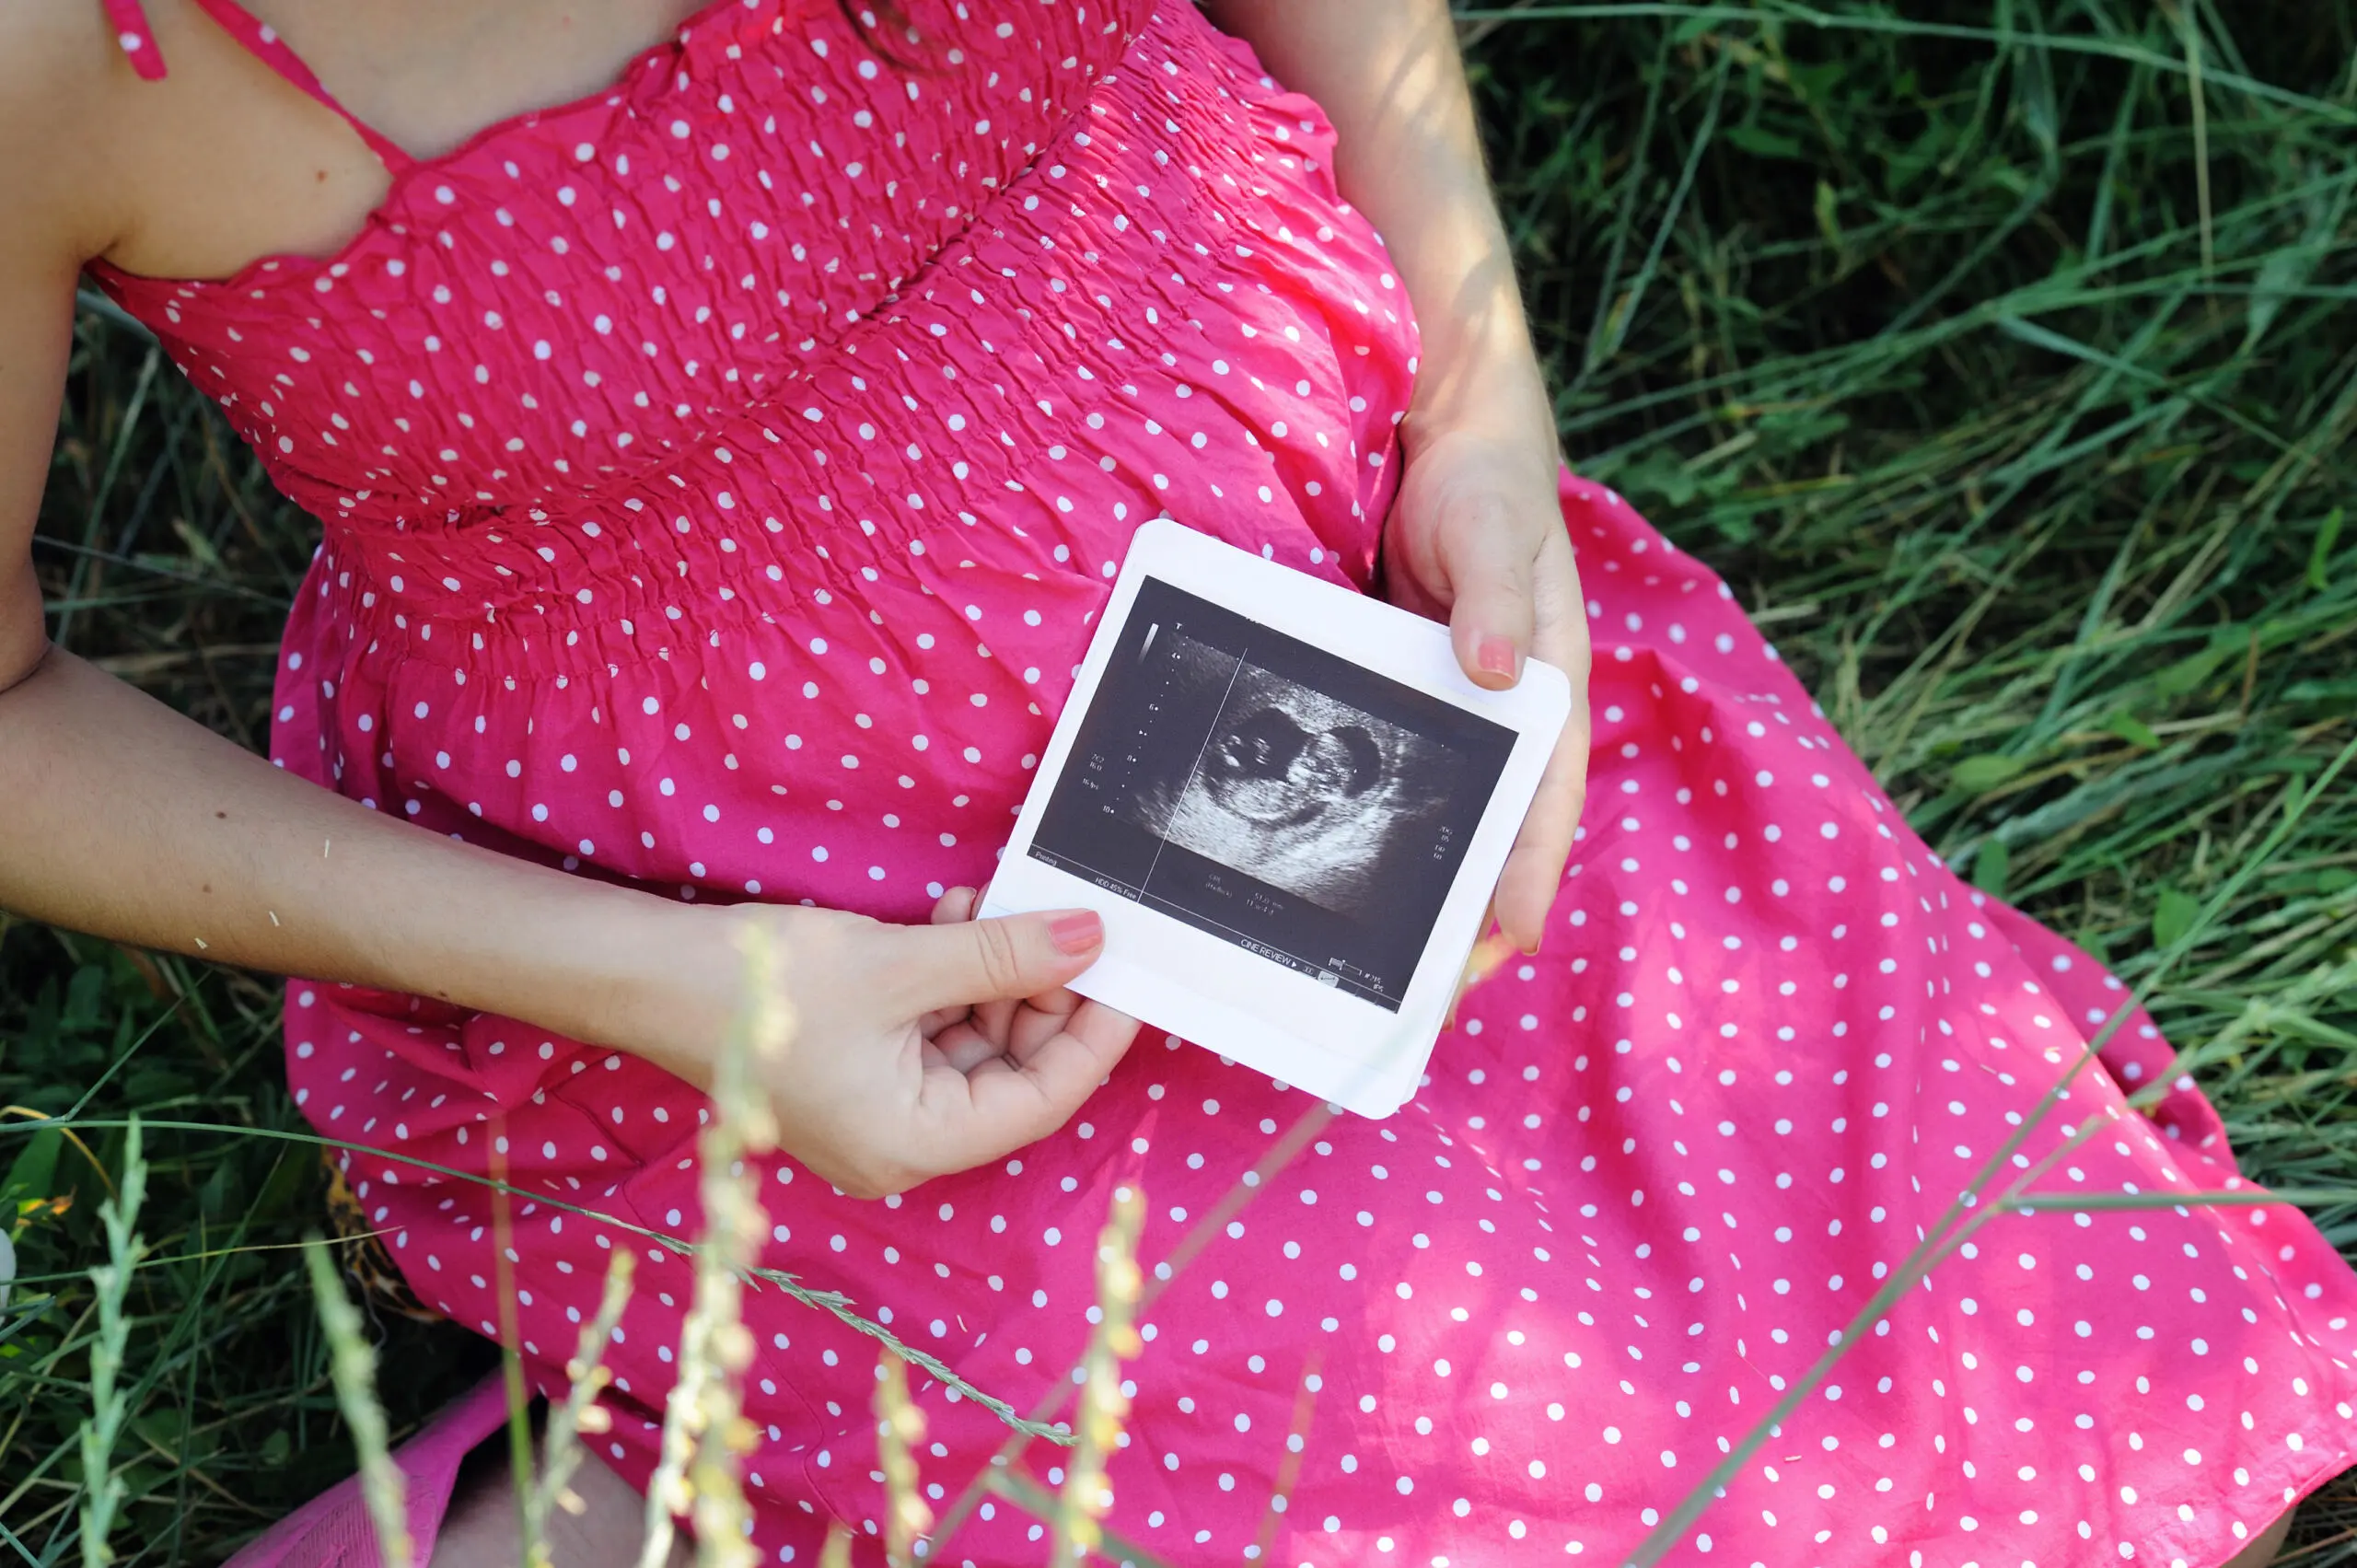 What To Expect During Your First Ultrasound?